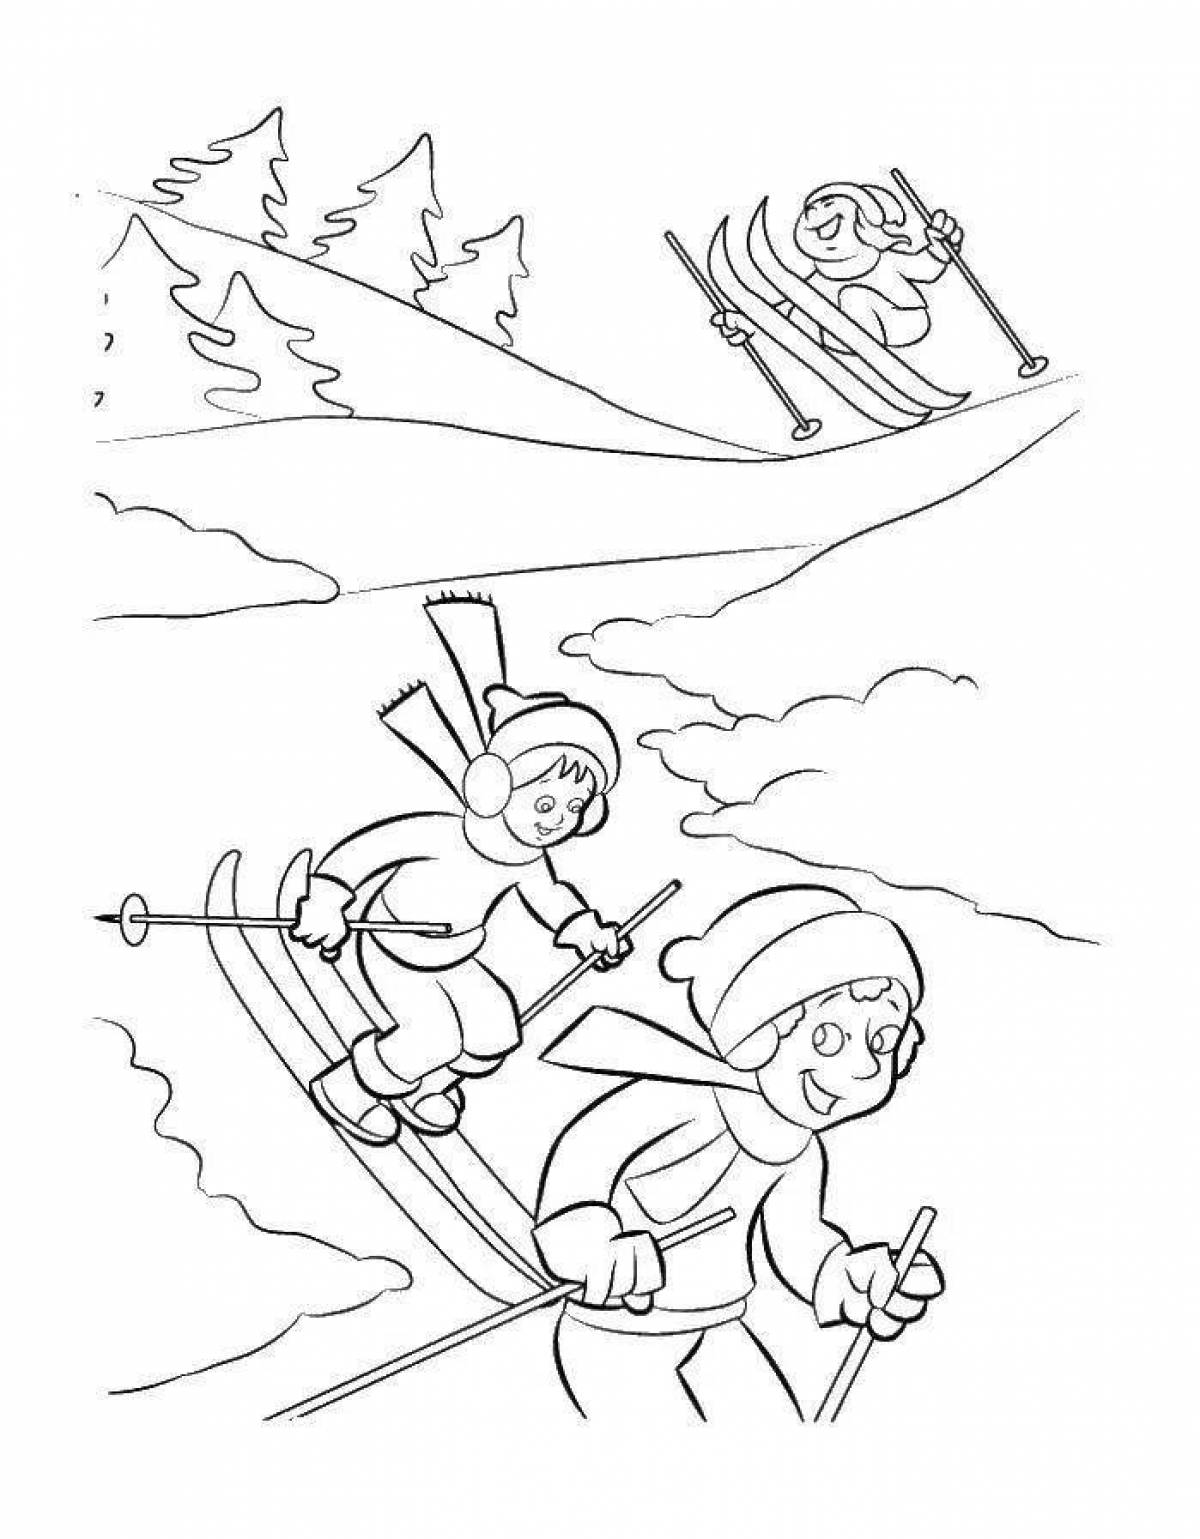 Great winter sports coloring page